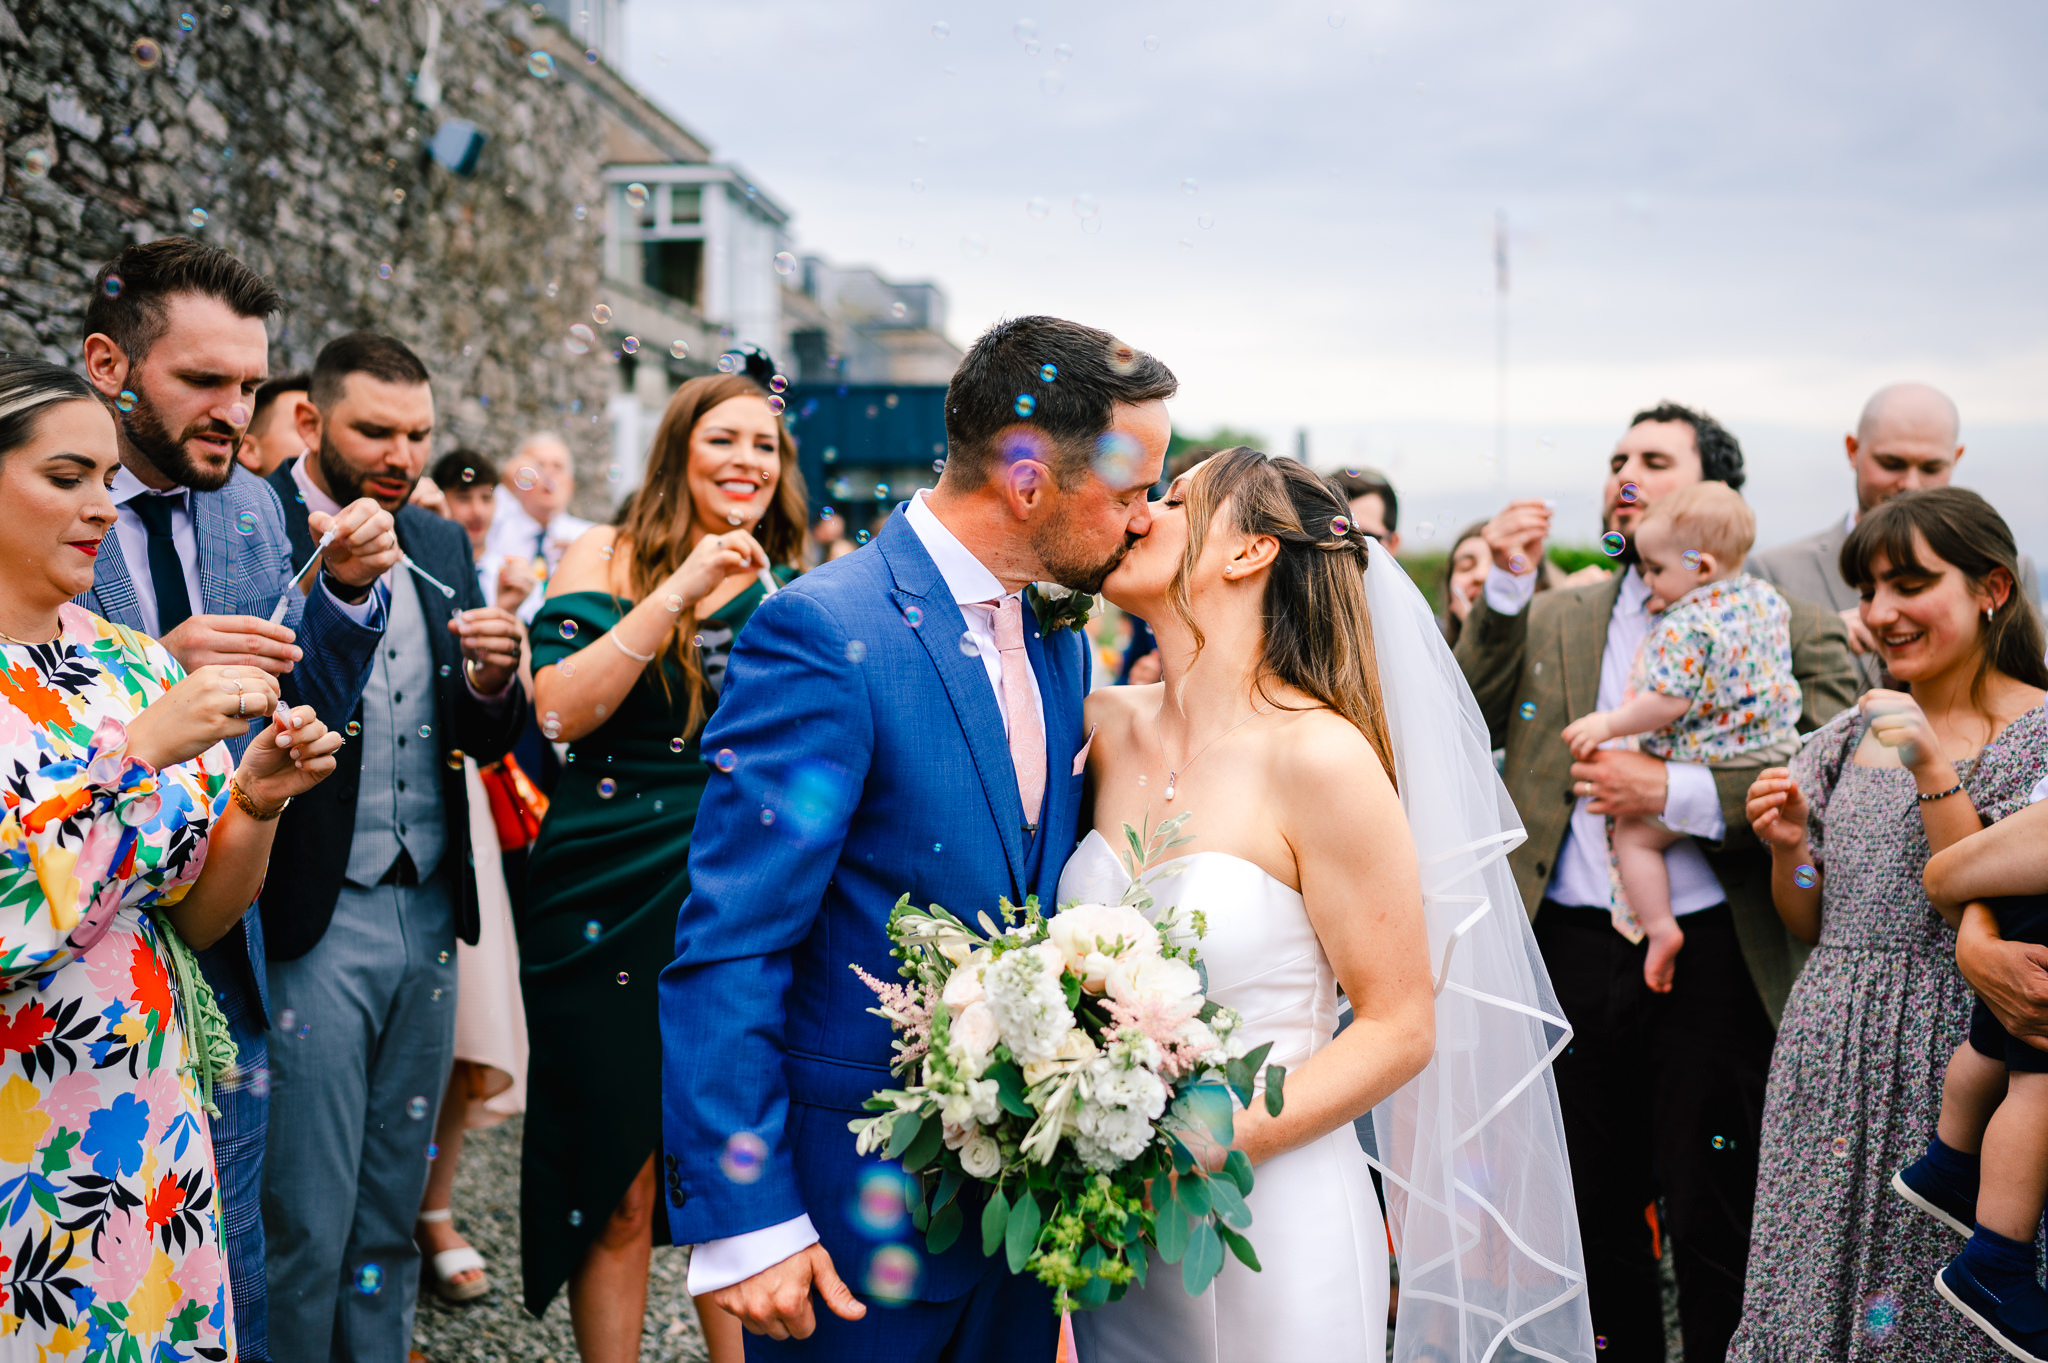 Creating A Unique Wedding Venue: Inspirational Themes and Decor Ideas-Jake Timms Photography-Cornwall Wedding Photographer